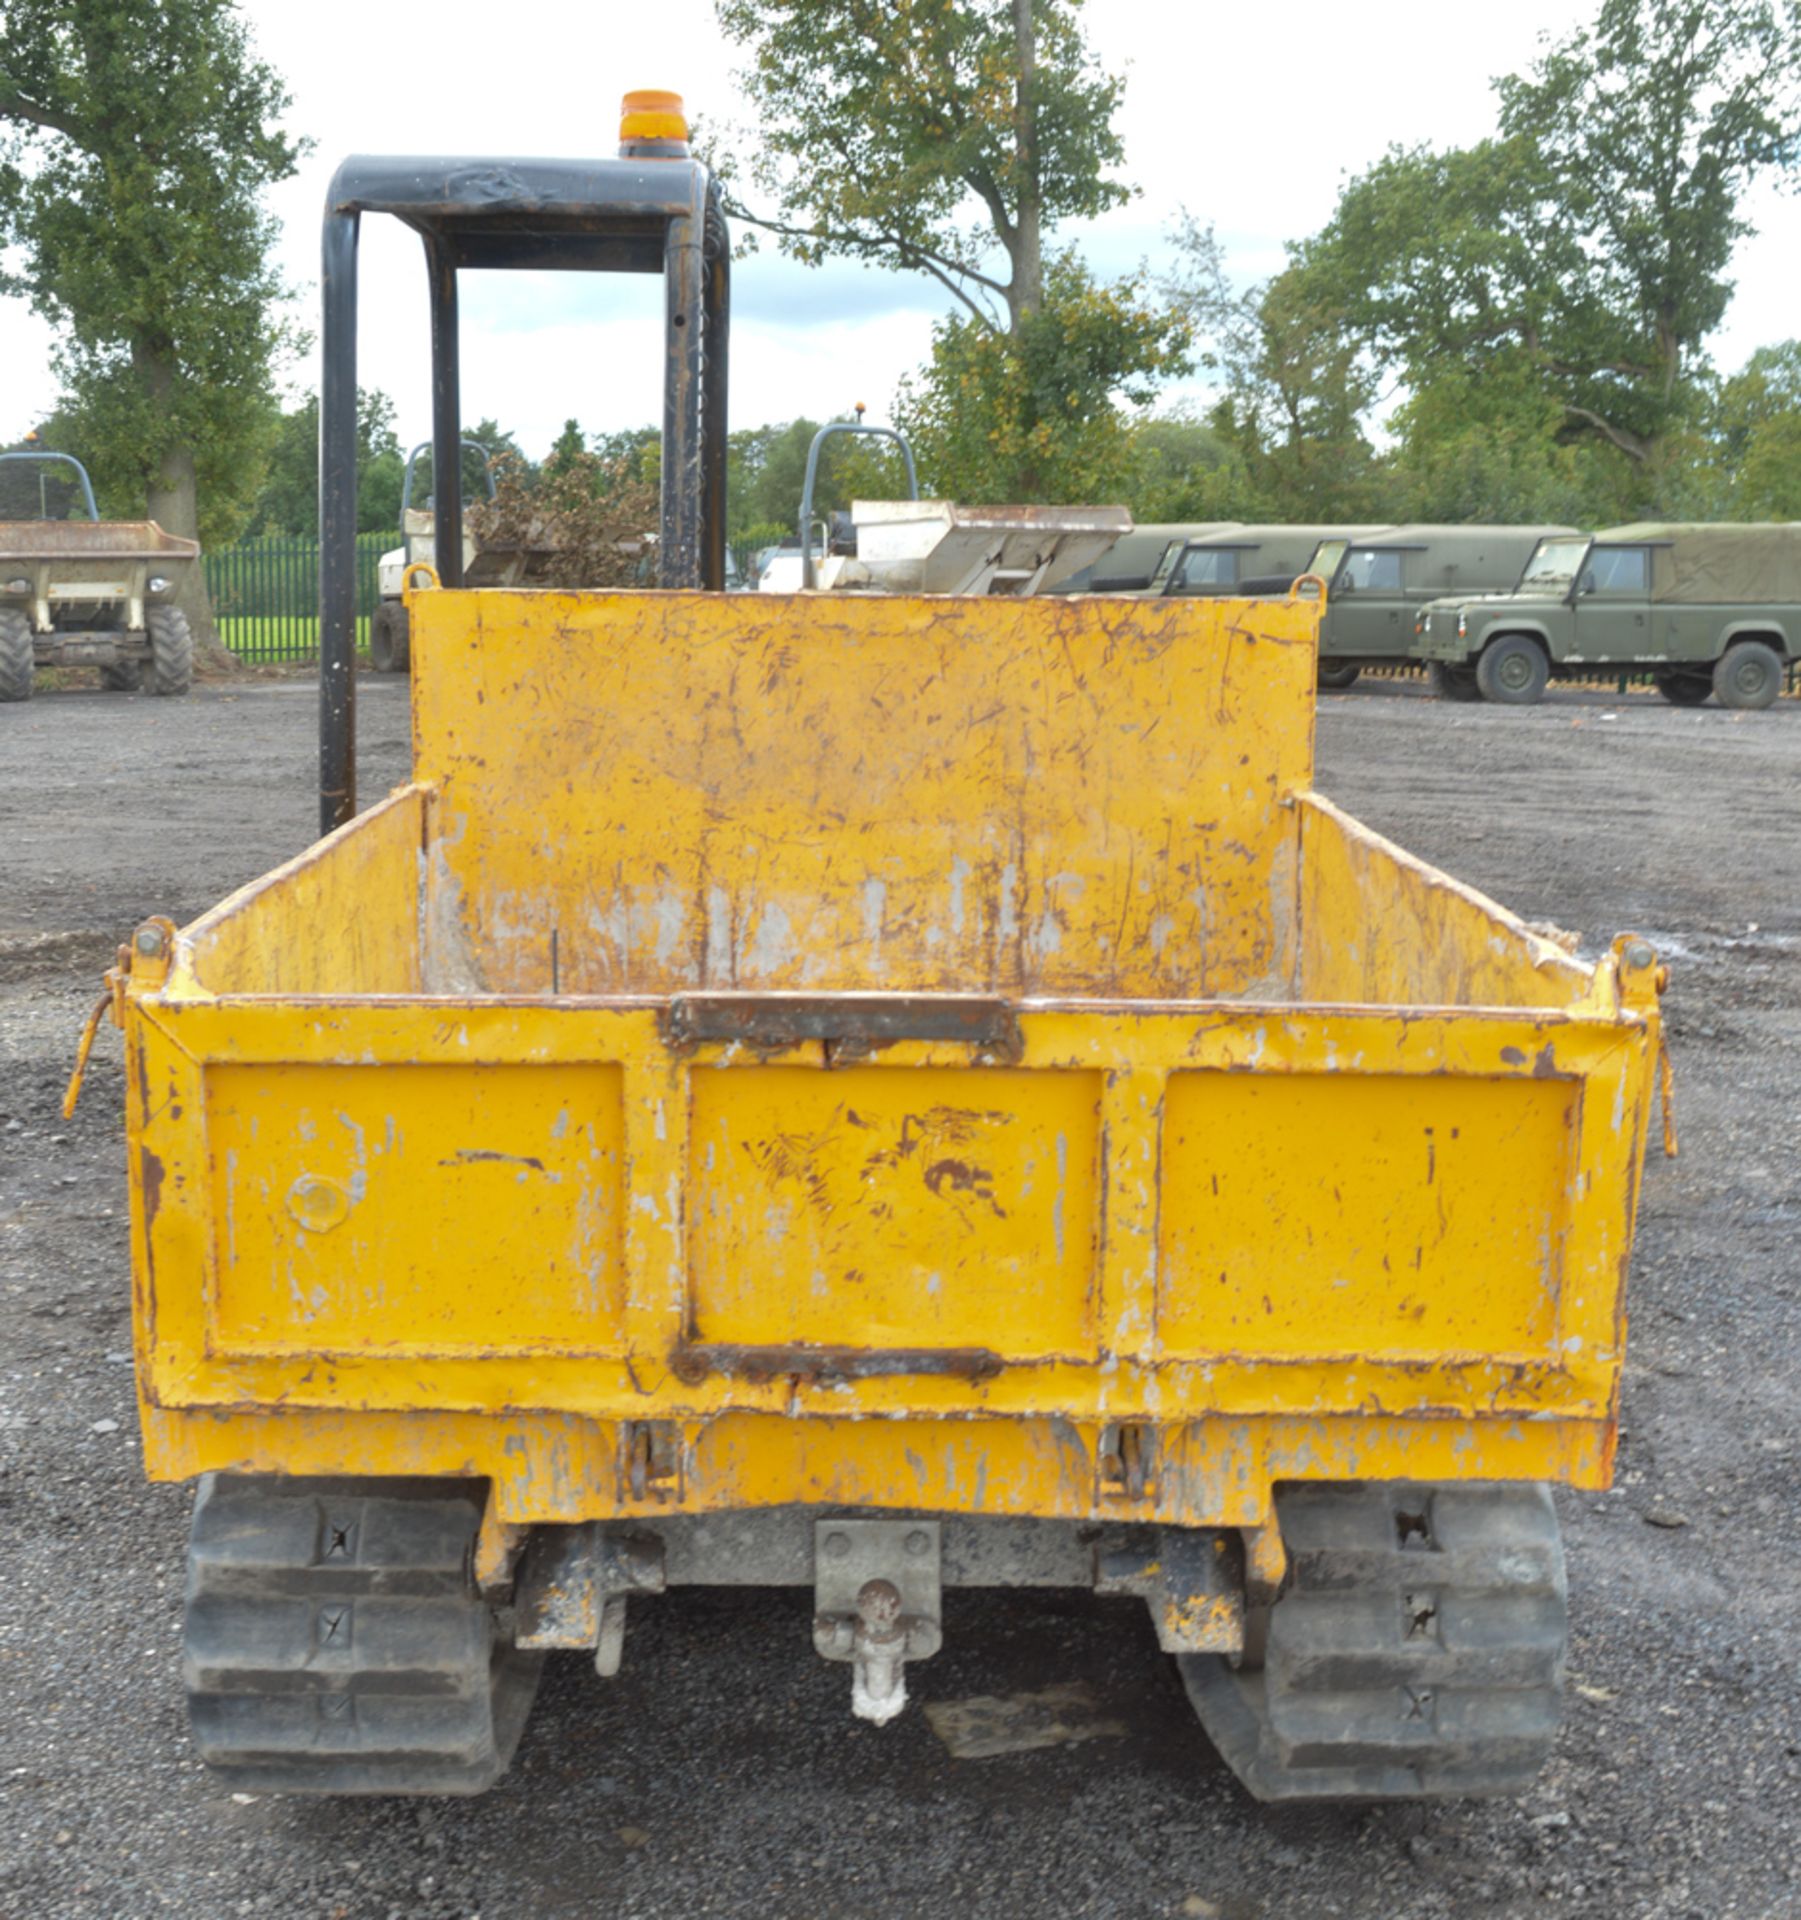 Morooka MST 300-VD 2.5 tonne rubber tracked dumper  Year: 2002 S/N: 3481 Recorded hours: 1103 - Image 5 of 9